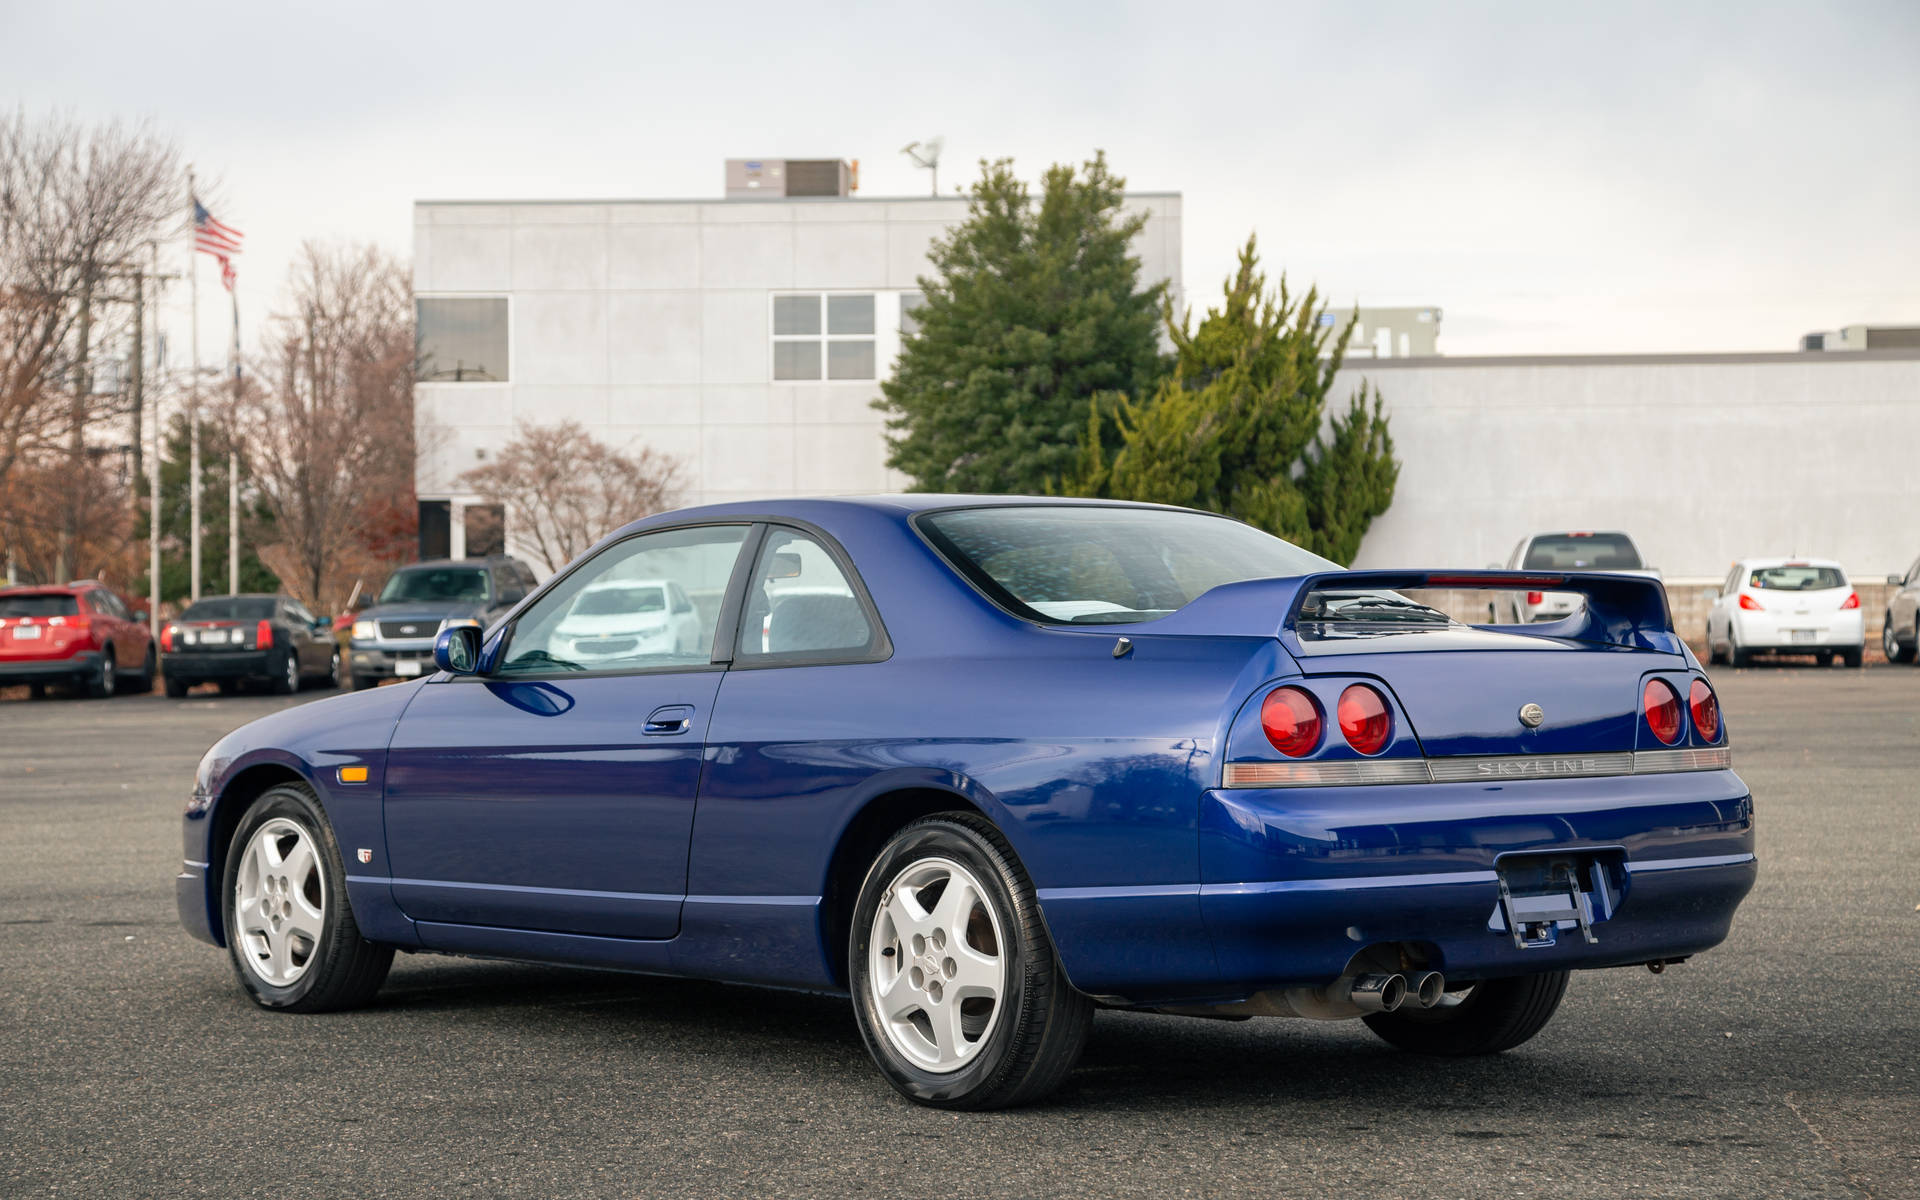 Blue Skyline Car Without License Plate